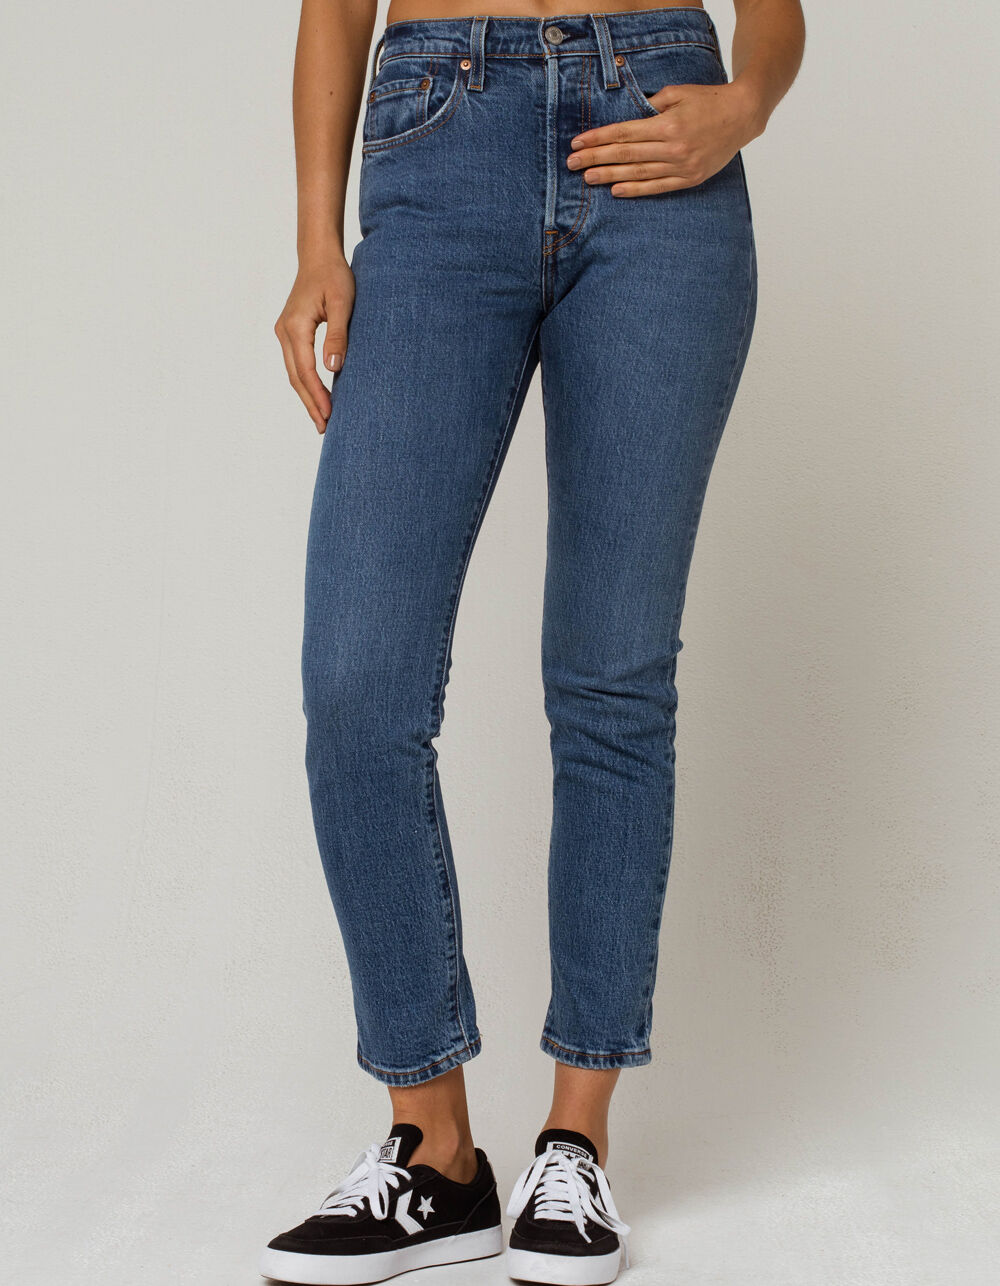 LEVI'S 501 Womens Skinny Jeans image number 1